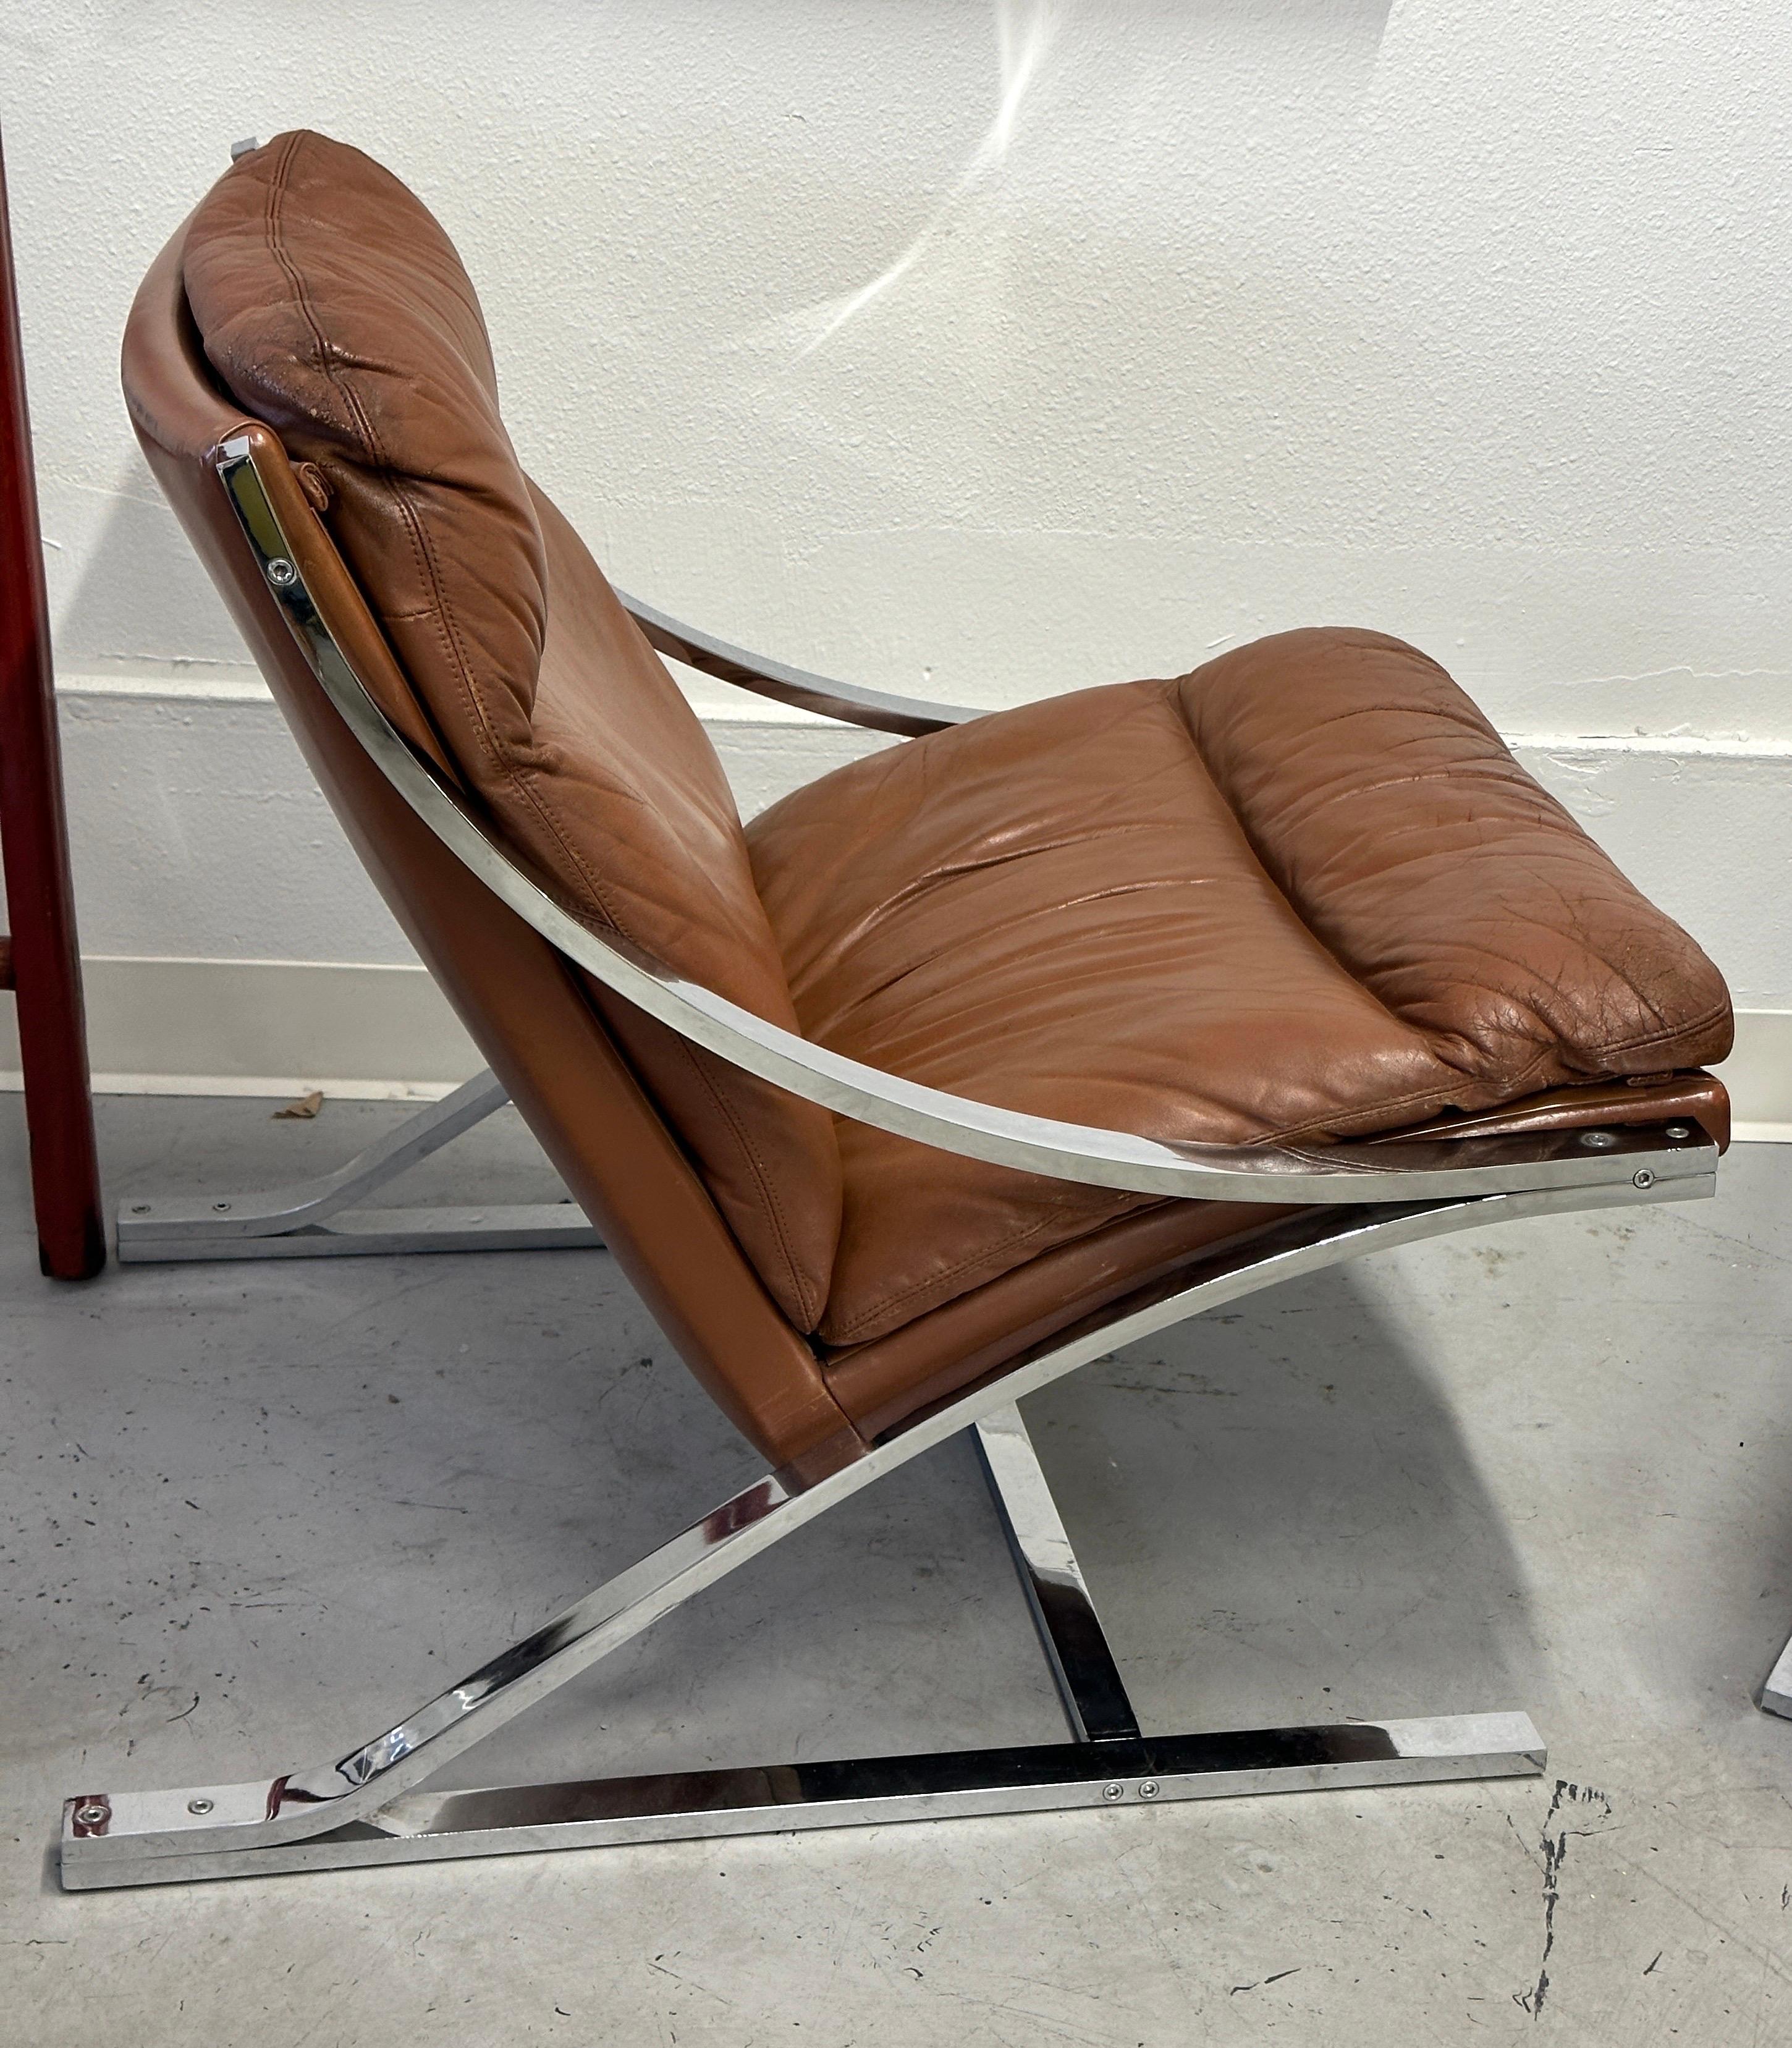 Hand-Crafted Paul Tuttle for Strassle Intl Zeta Chairs For Sale